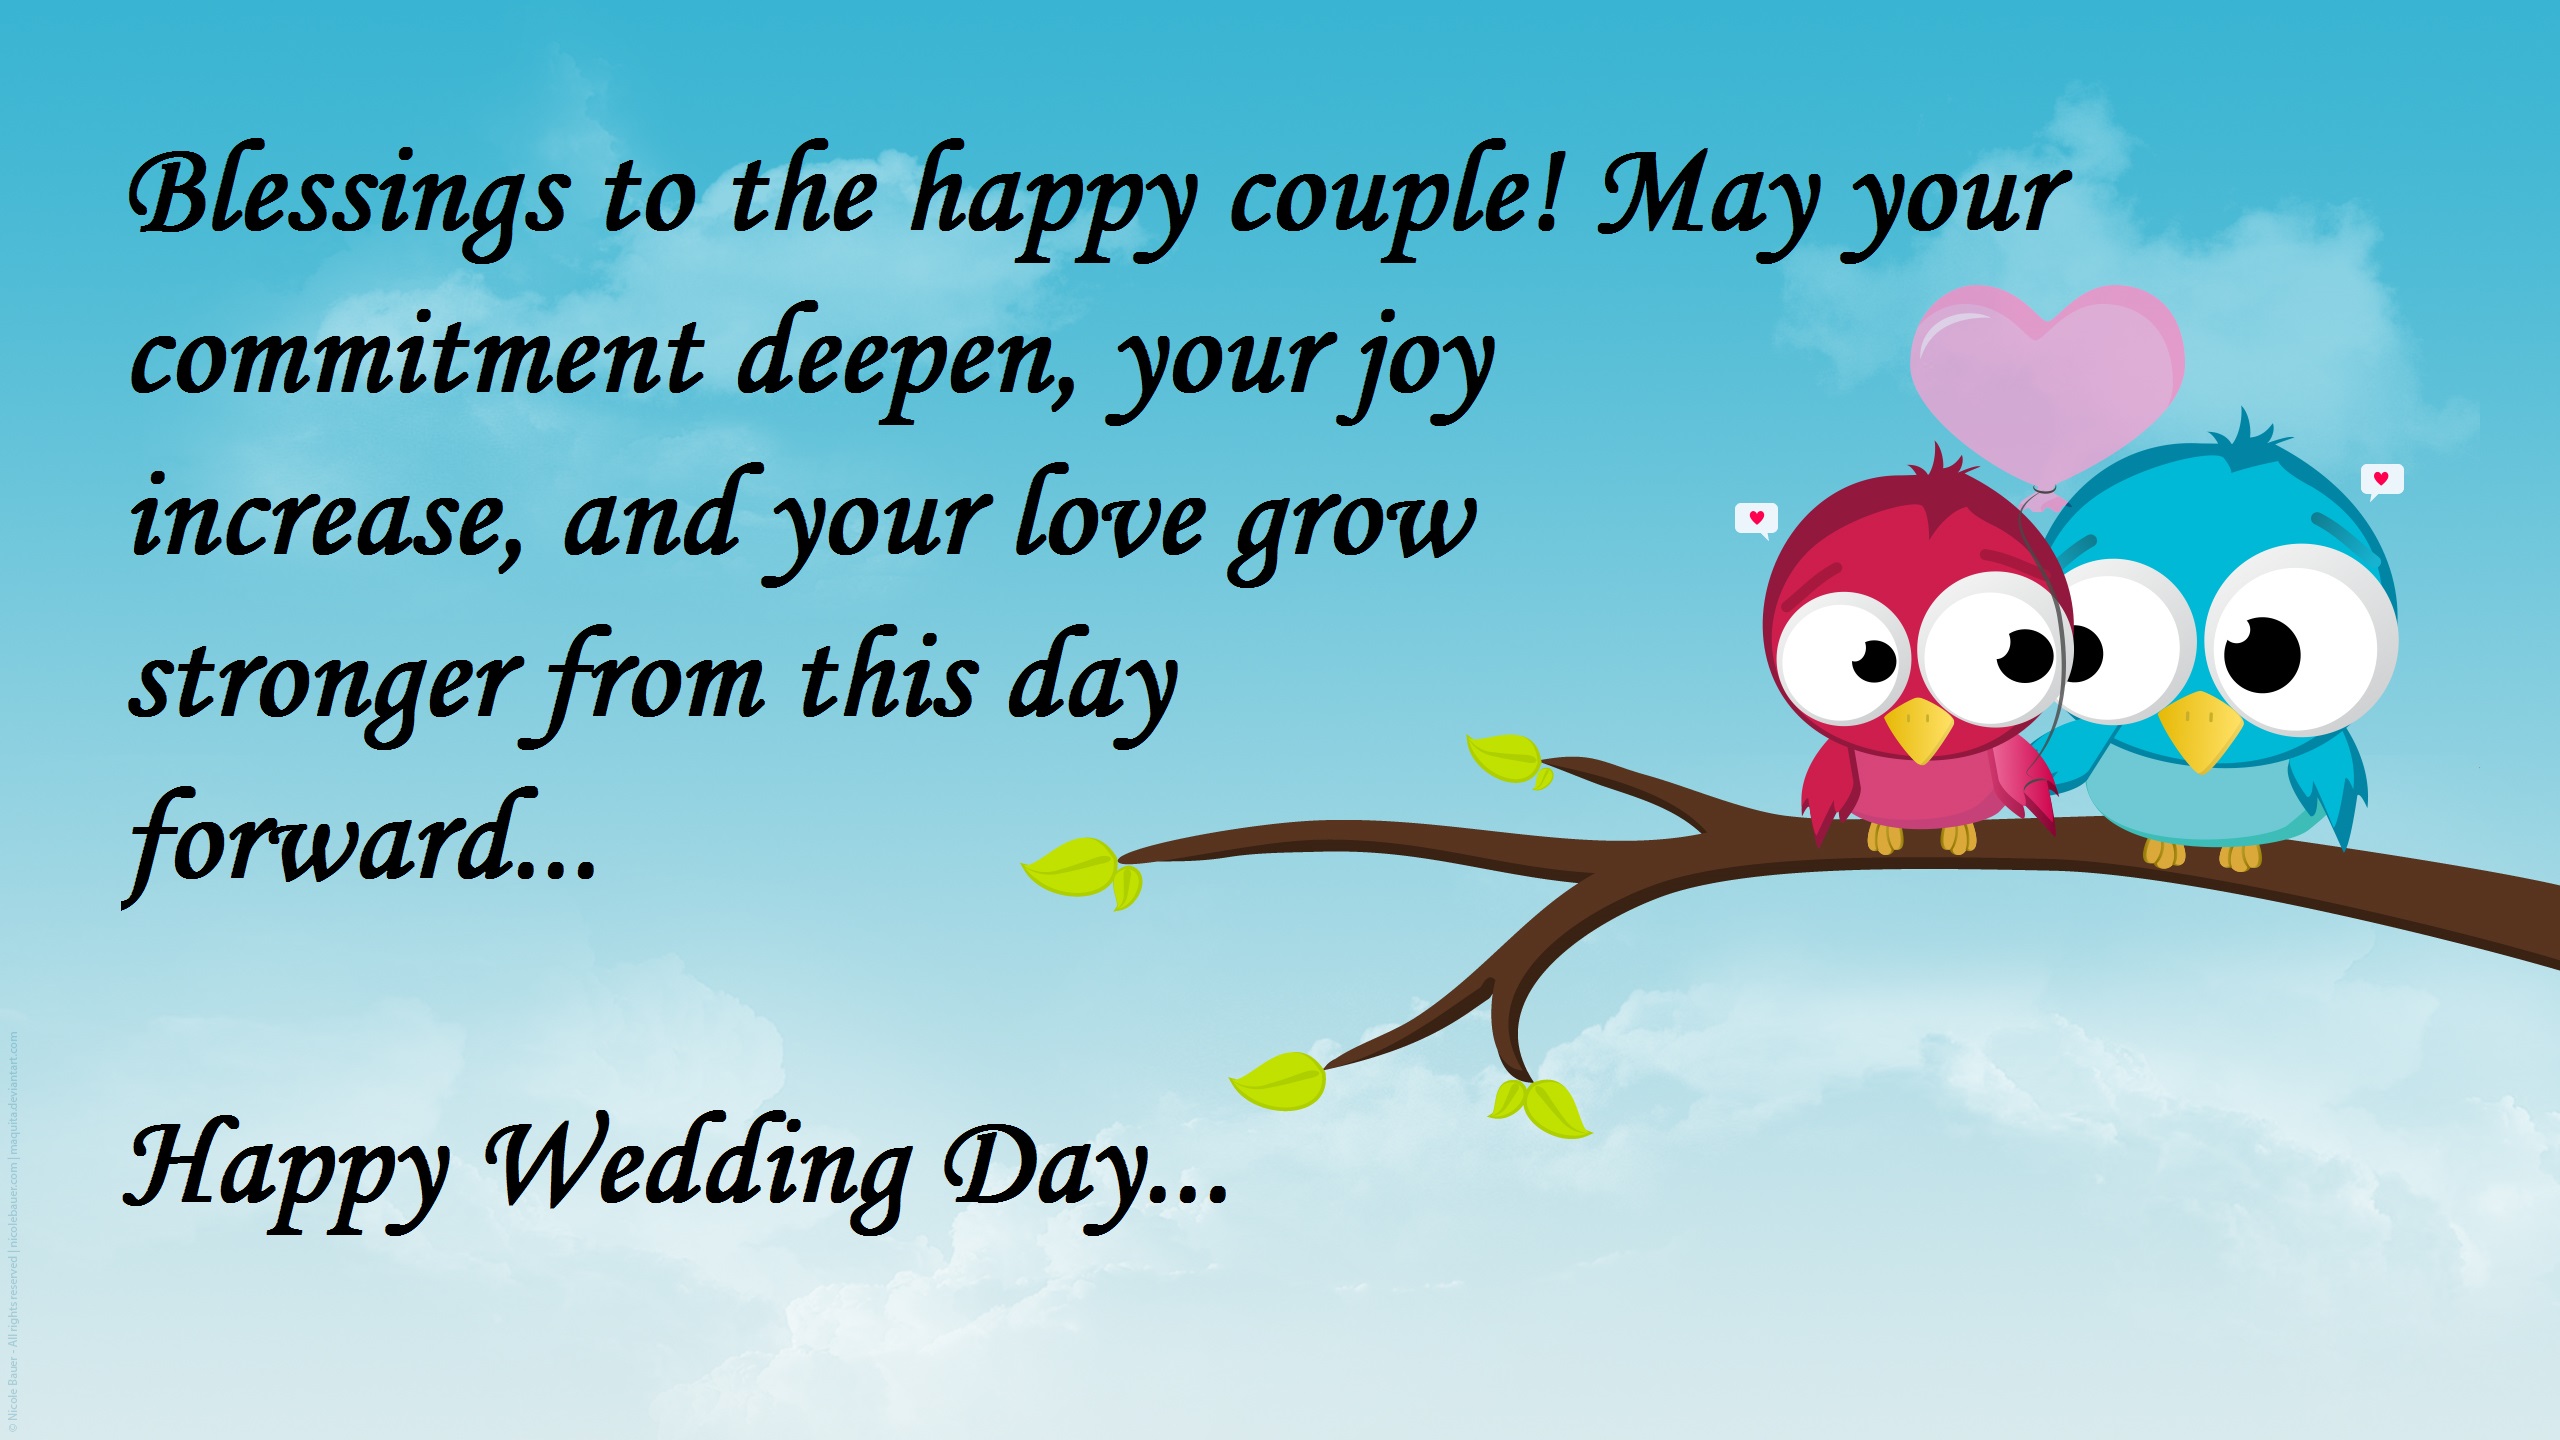 lovely image with wedding wishes